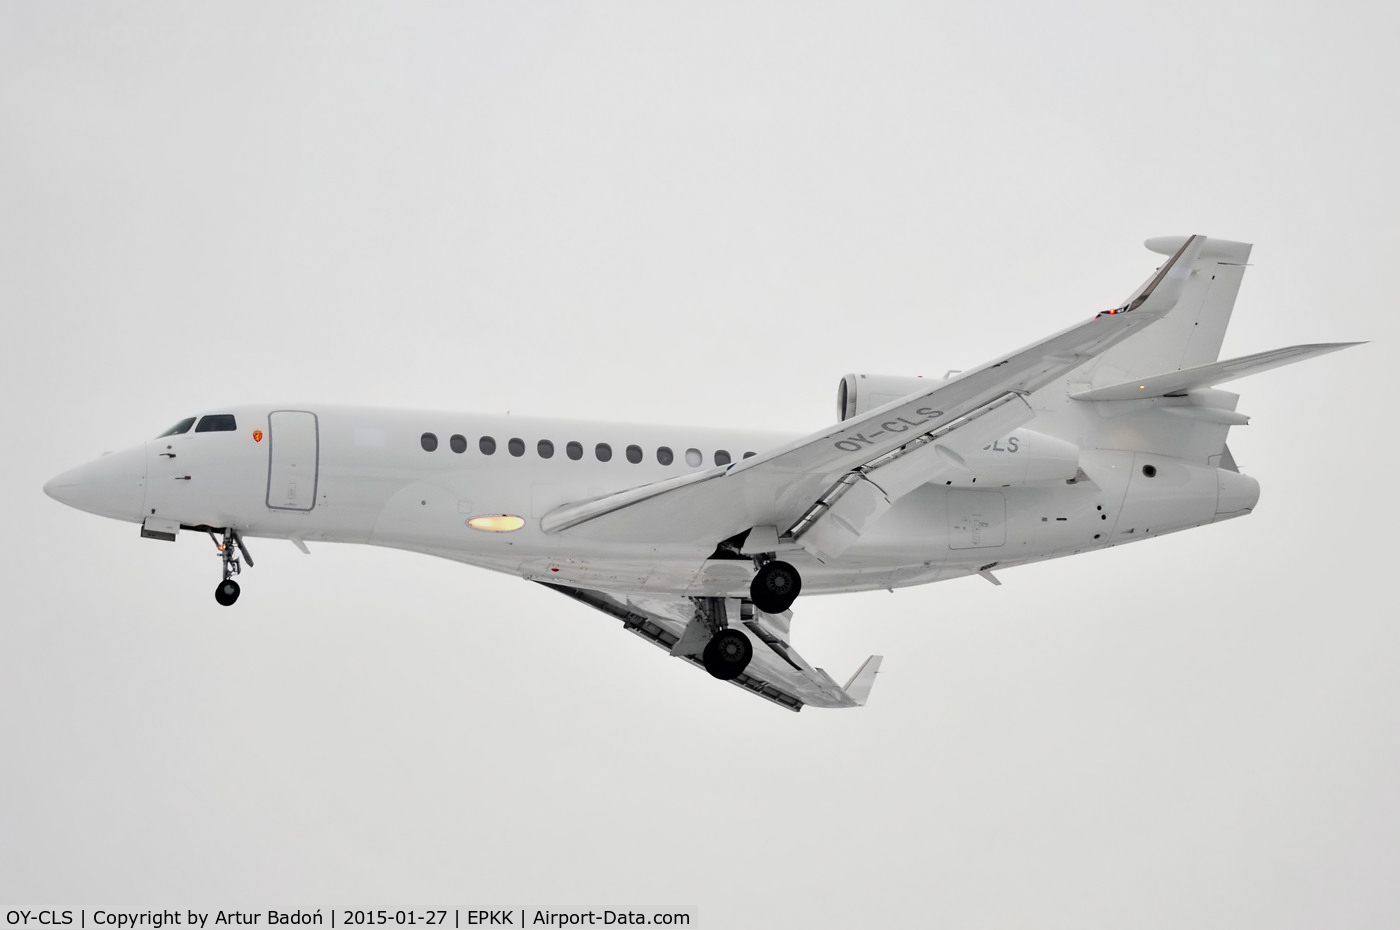 OY-CLS, 2012 Dassault Falcon 7X C/N 155, Private